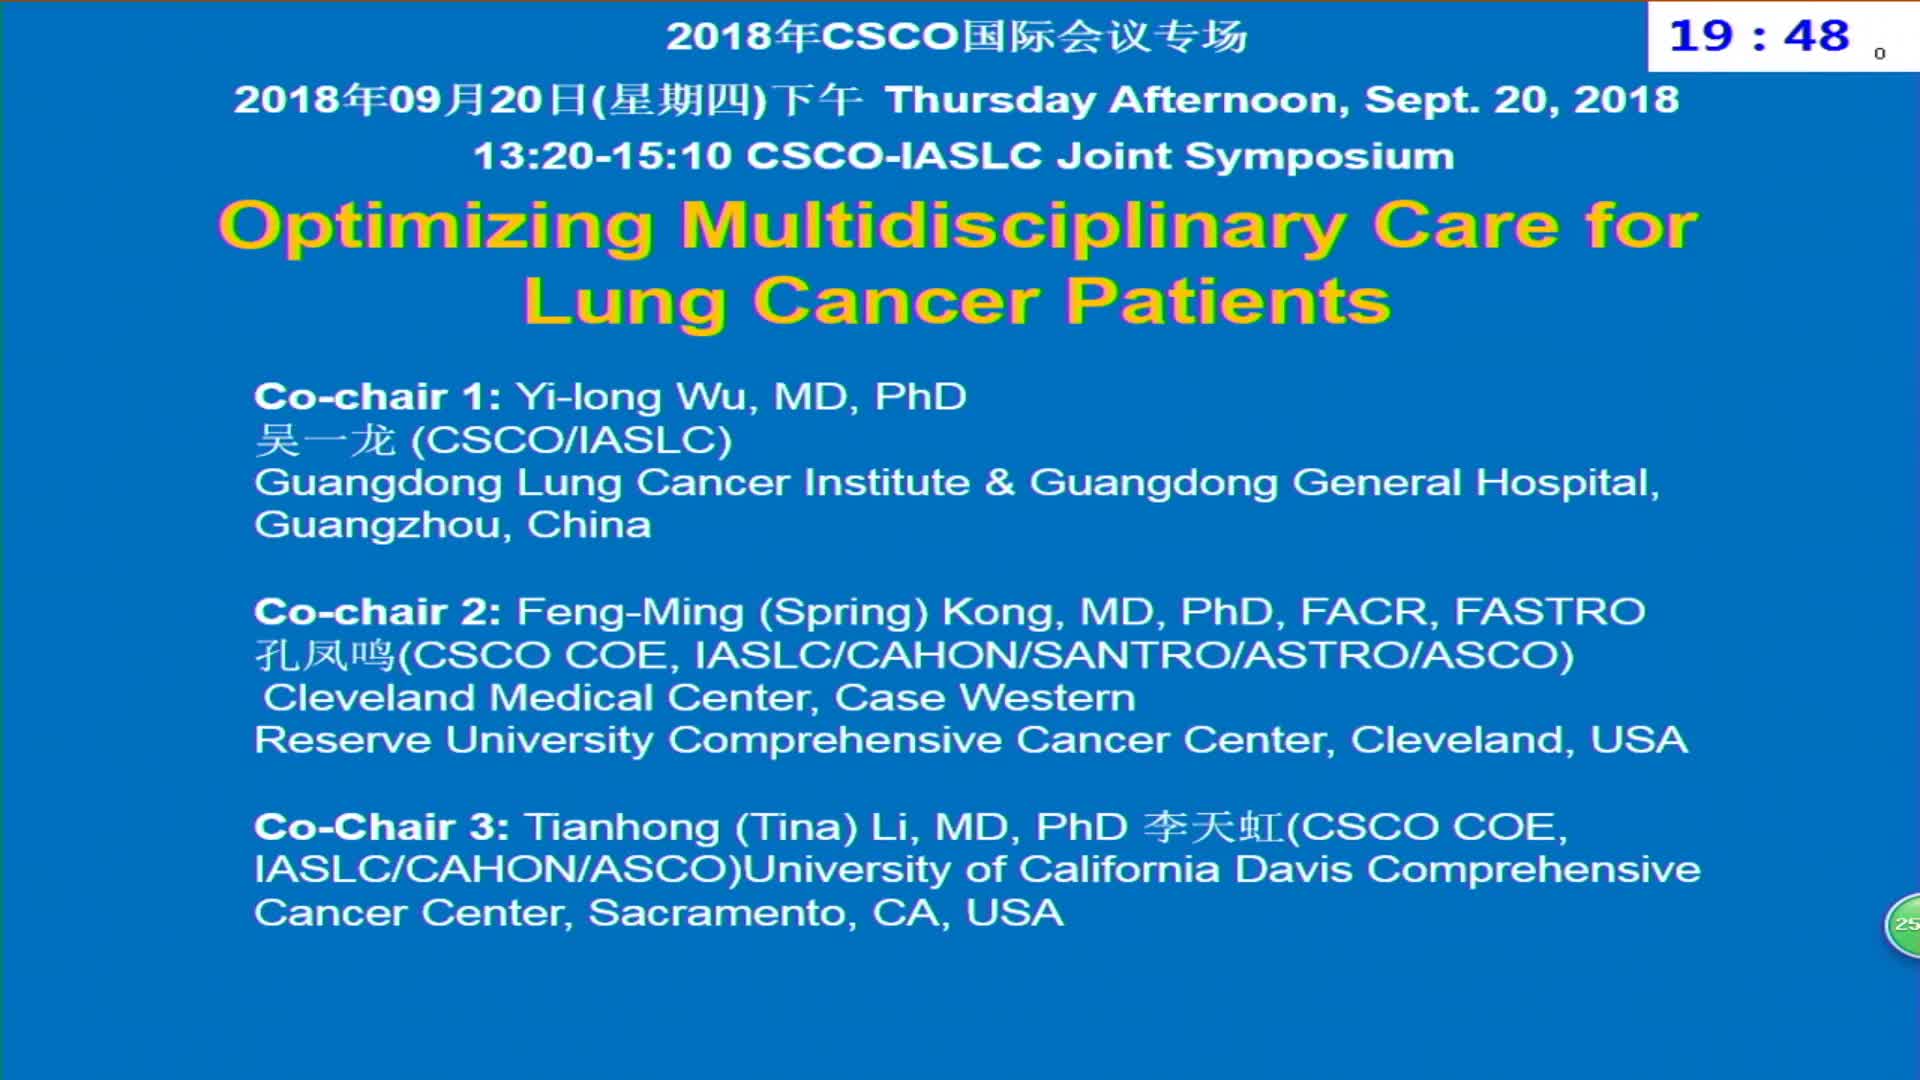 The role of Multidisplinary care in the era of immunotherapy-where does the future hold?